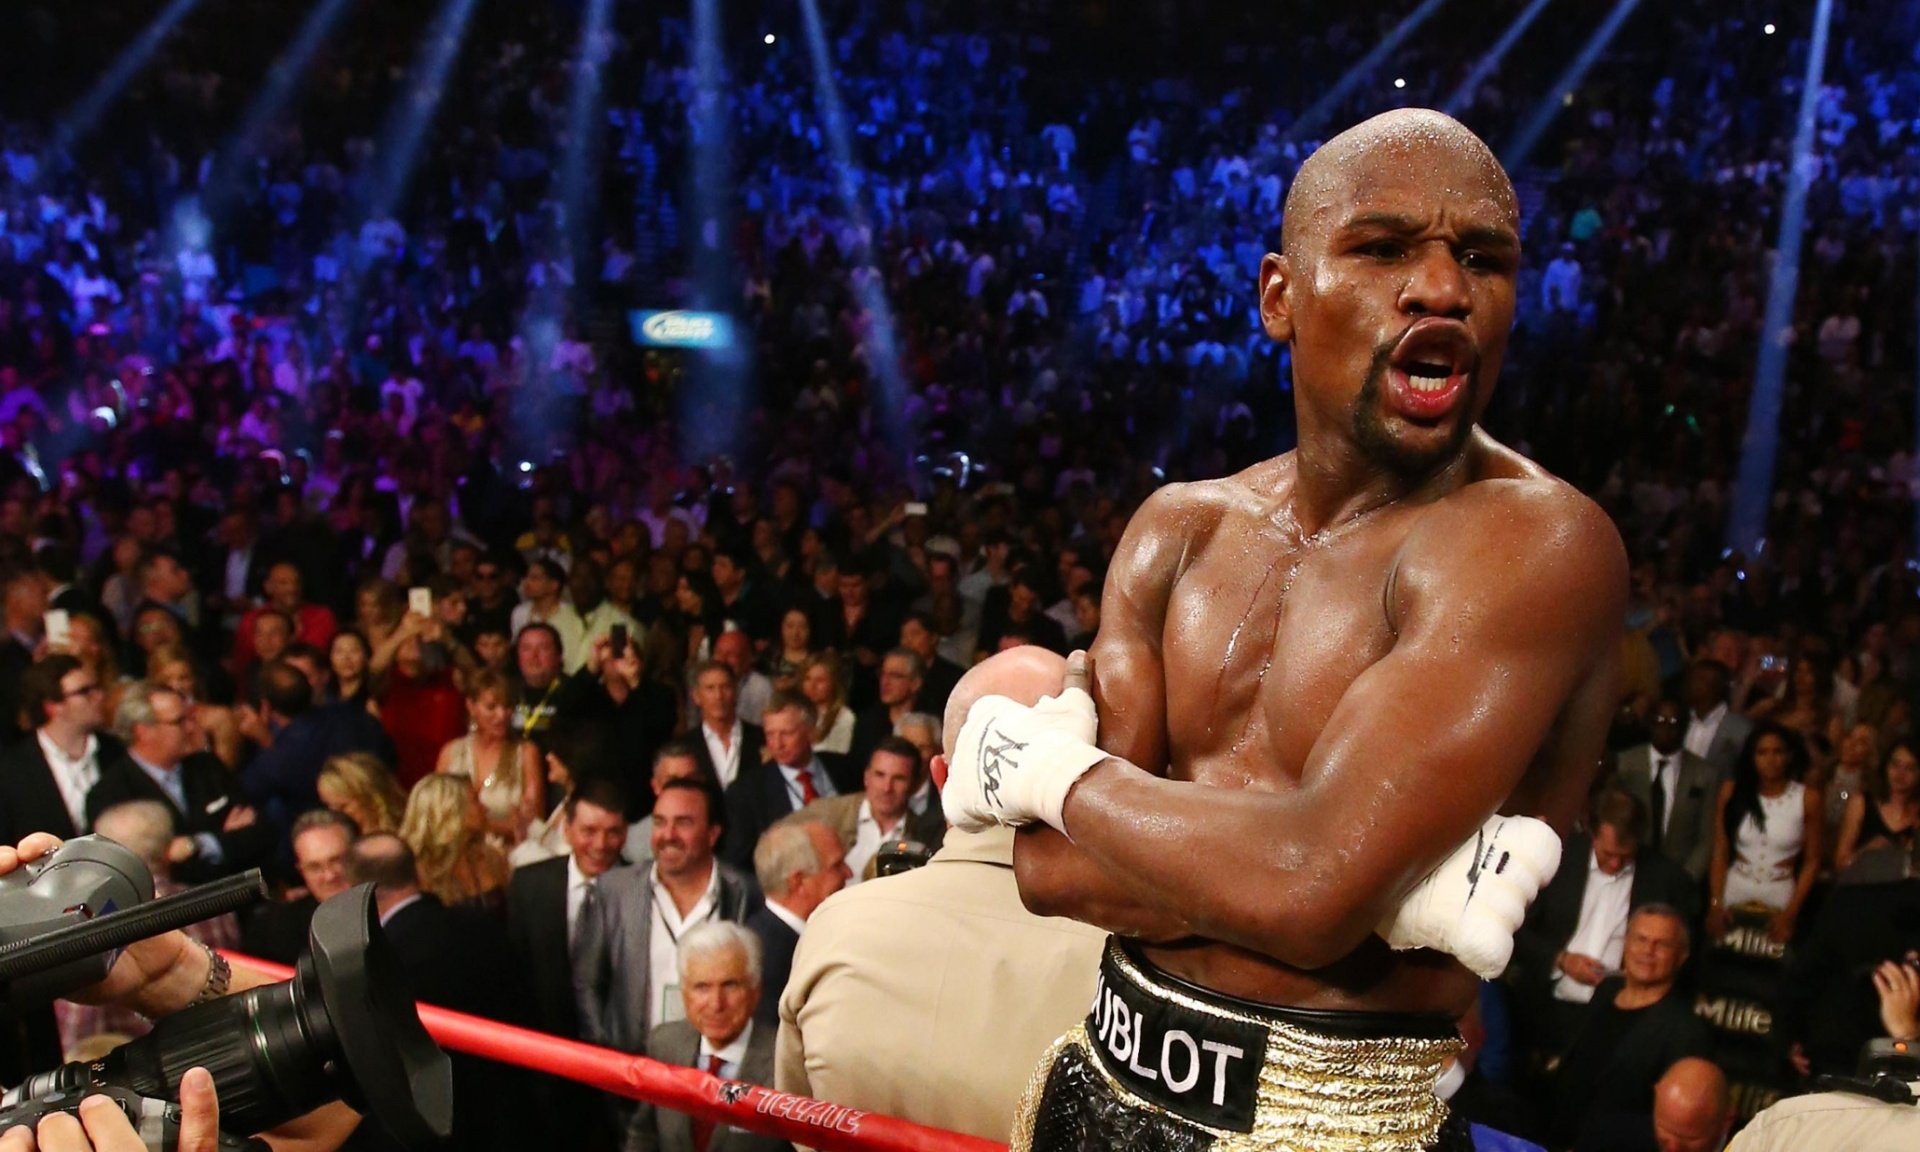 Floyd 'Money' Mayweather v Manny Pacquiao sums up our greedy times 